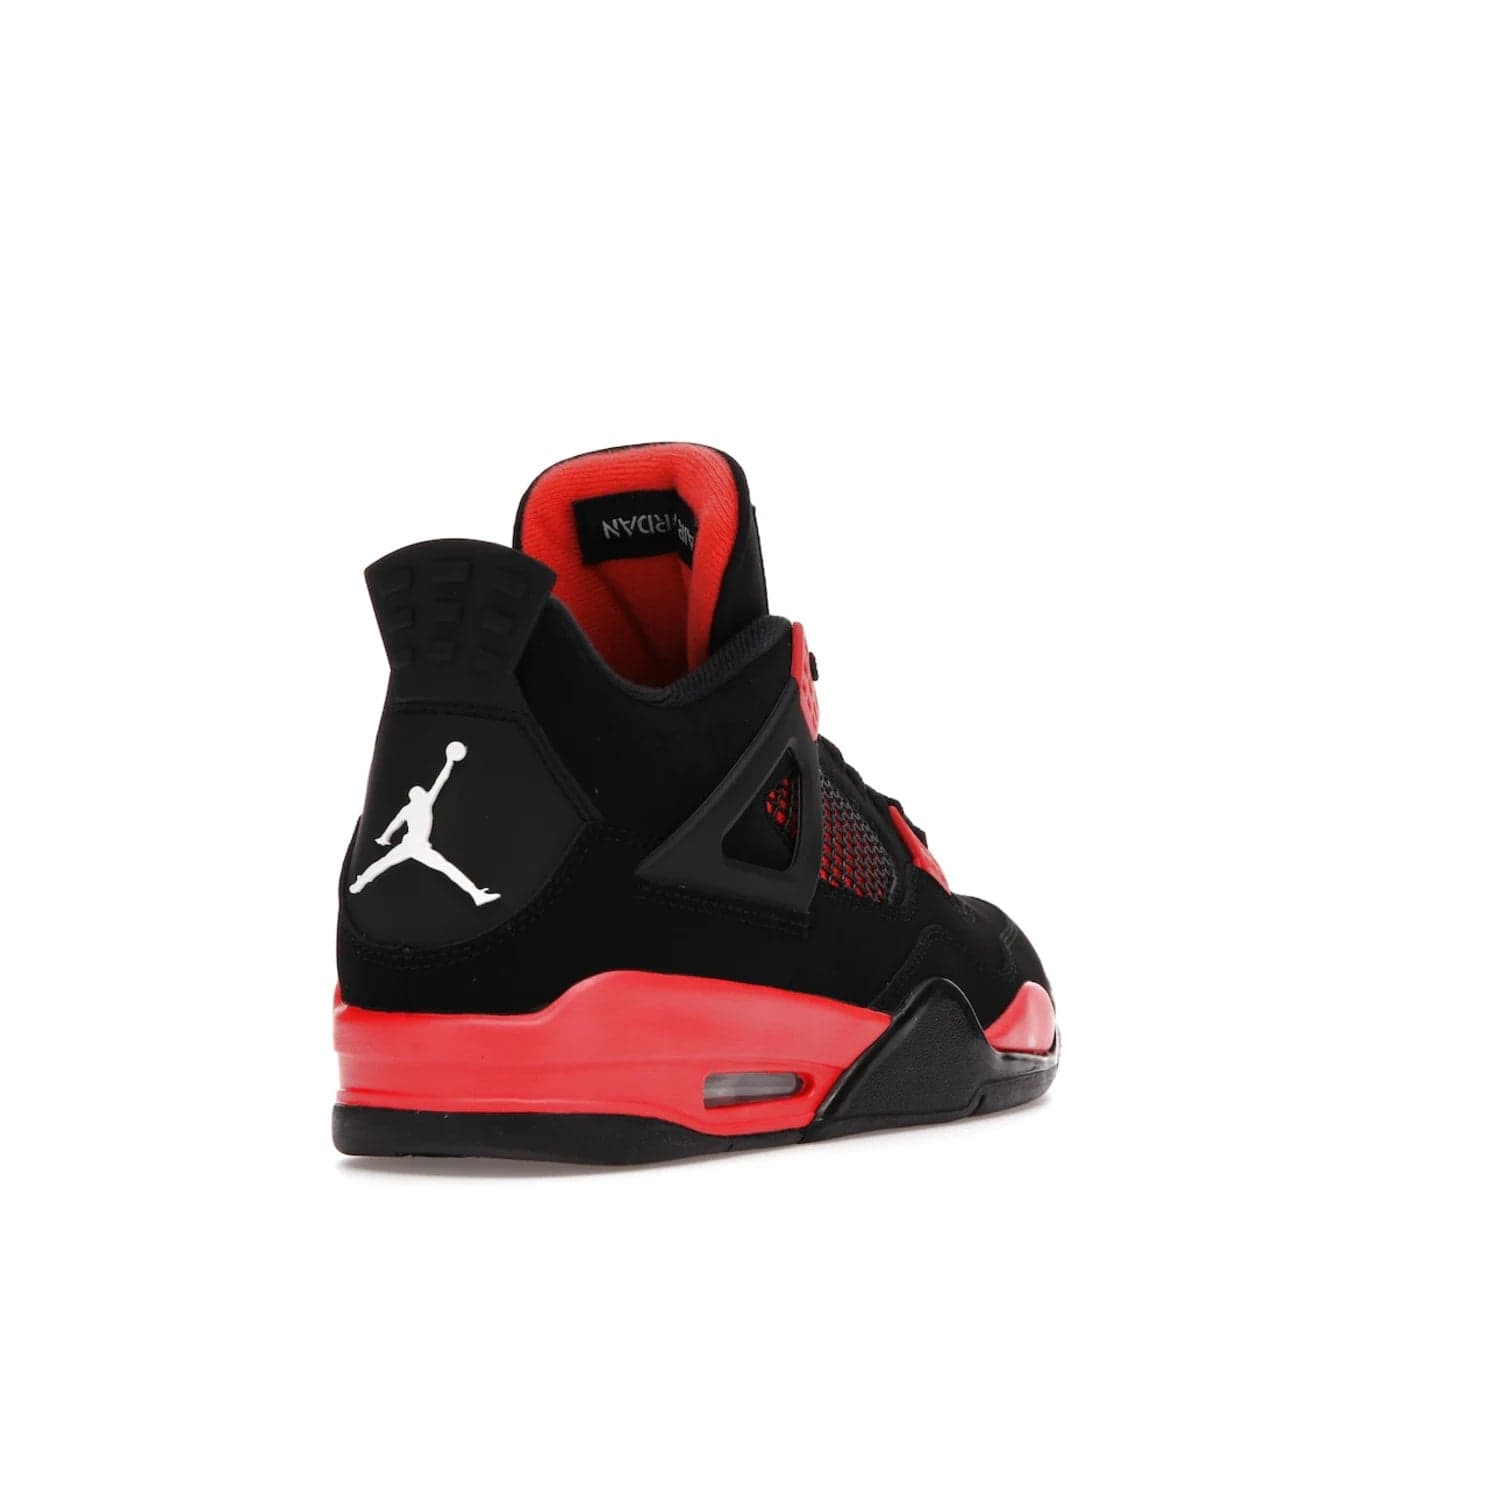 Jordan 4 Retro Red Thunder - Image 31 - Only at www.BallersClubKickz.com - Upscale your footwear with the Air Jordan 4 Retro Red Thunder. Featuring a Durabuck upper, red underlays, signature Flight patch, and vibrant red midsole, this retro sneaker adds style and edge. Releases in January 2022.